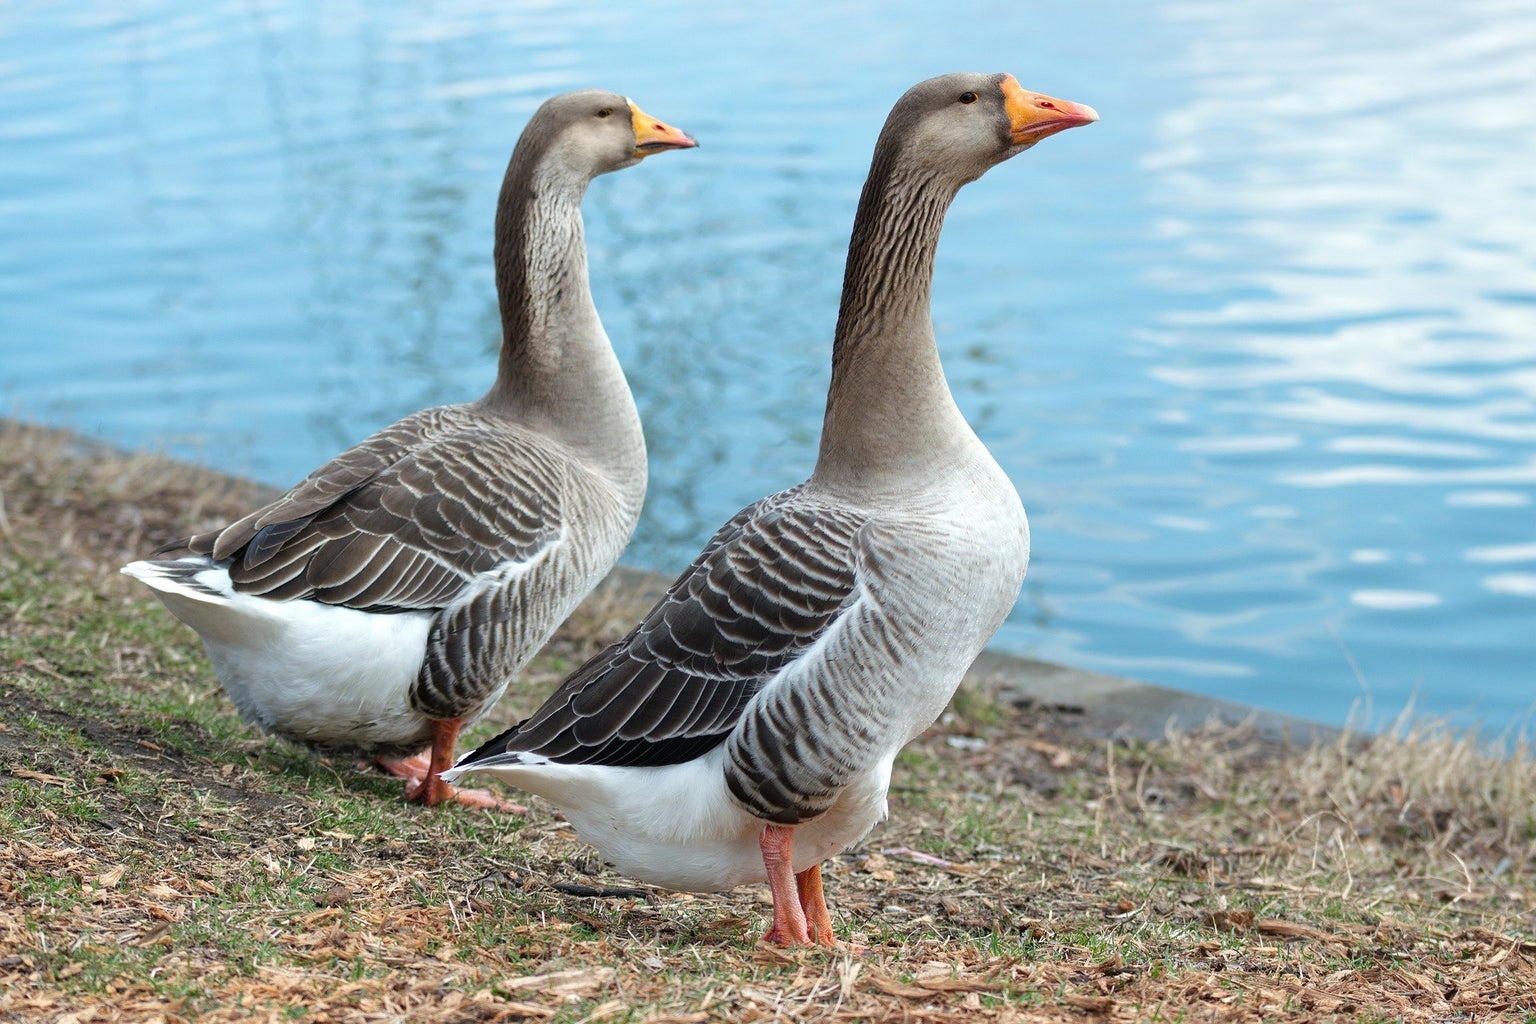 picture of geese standing near water